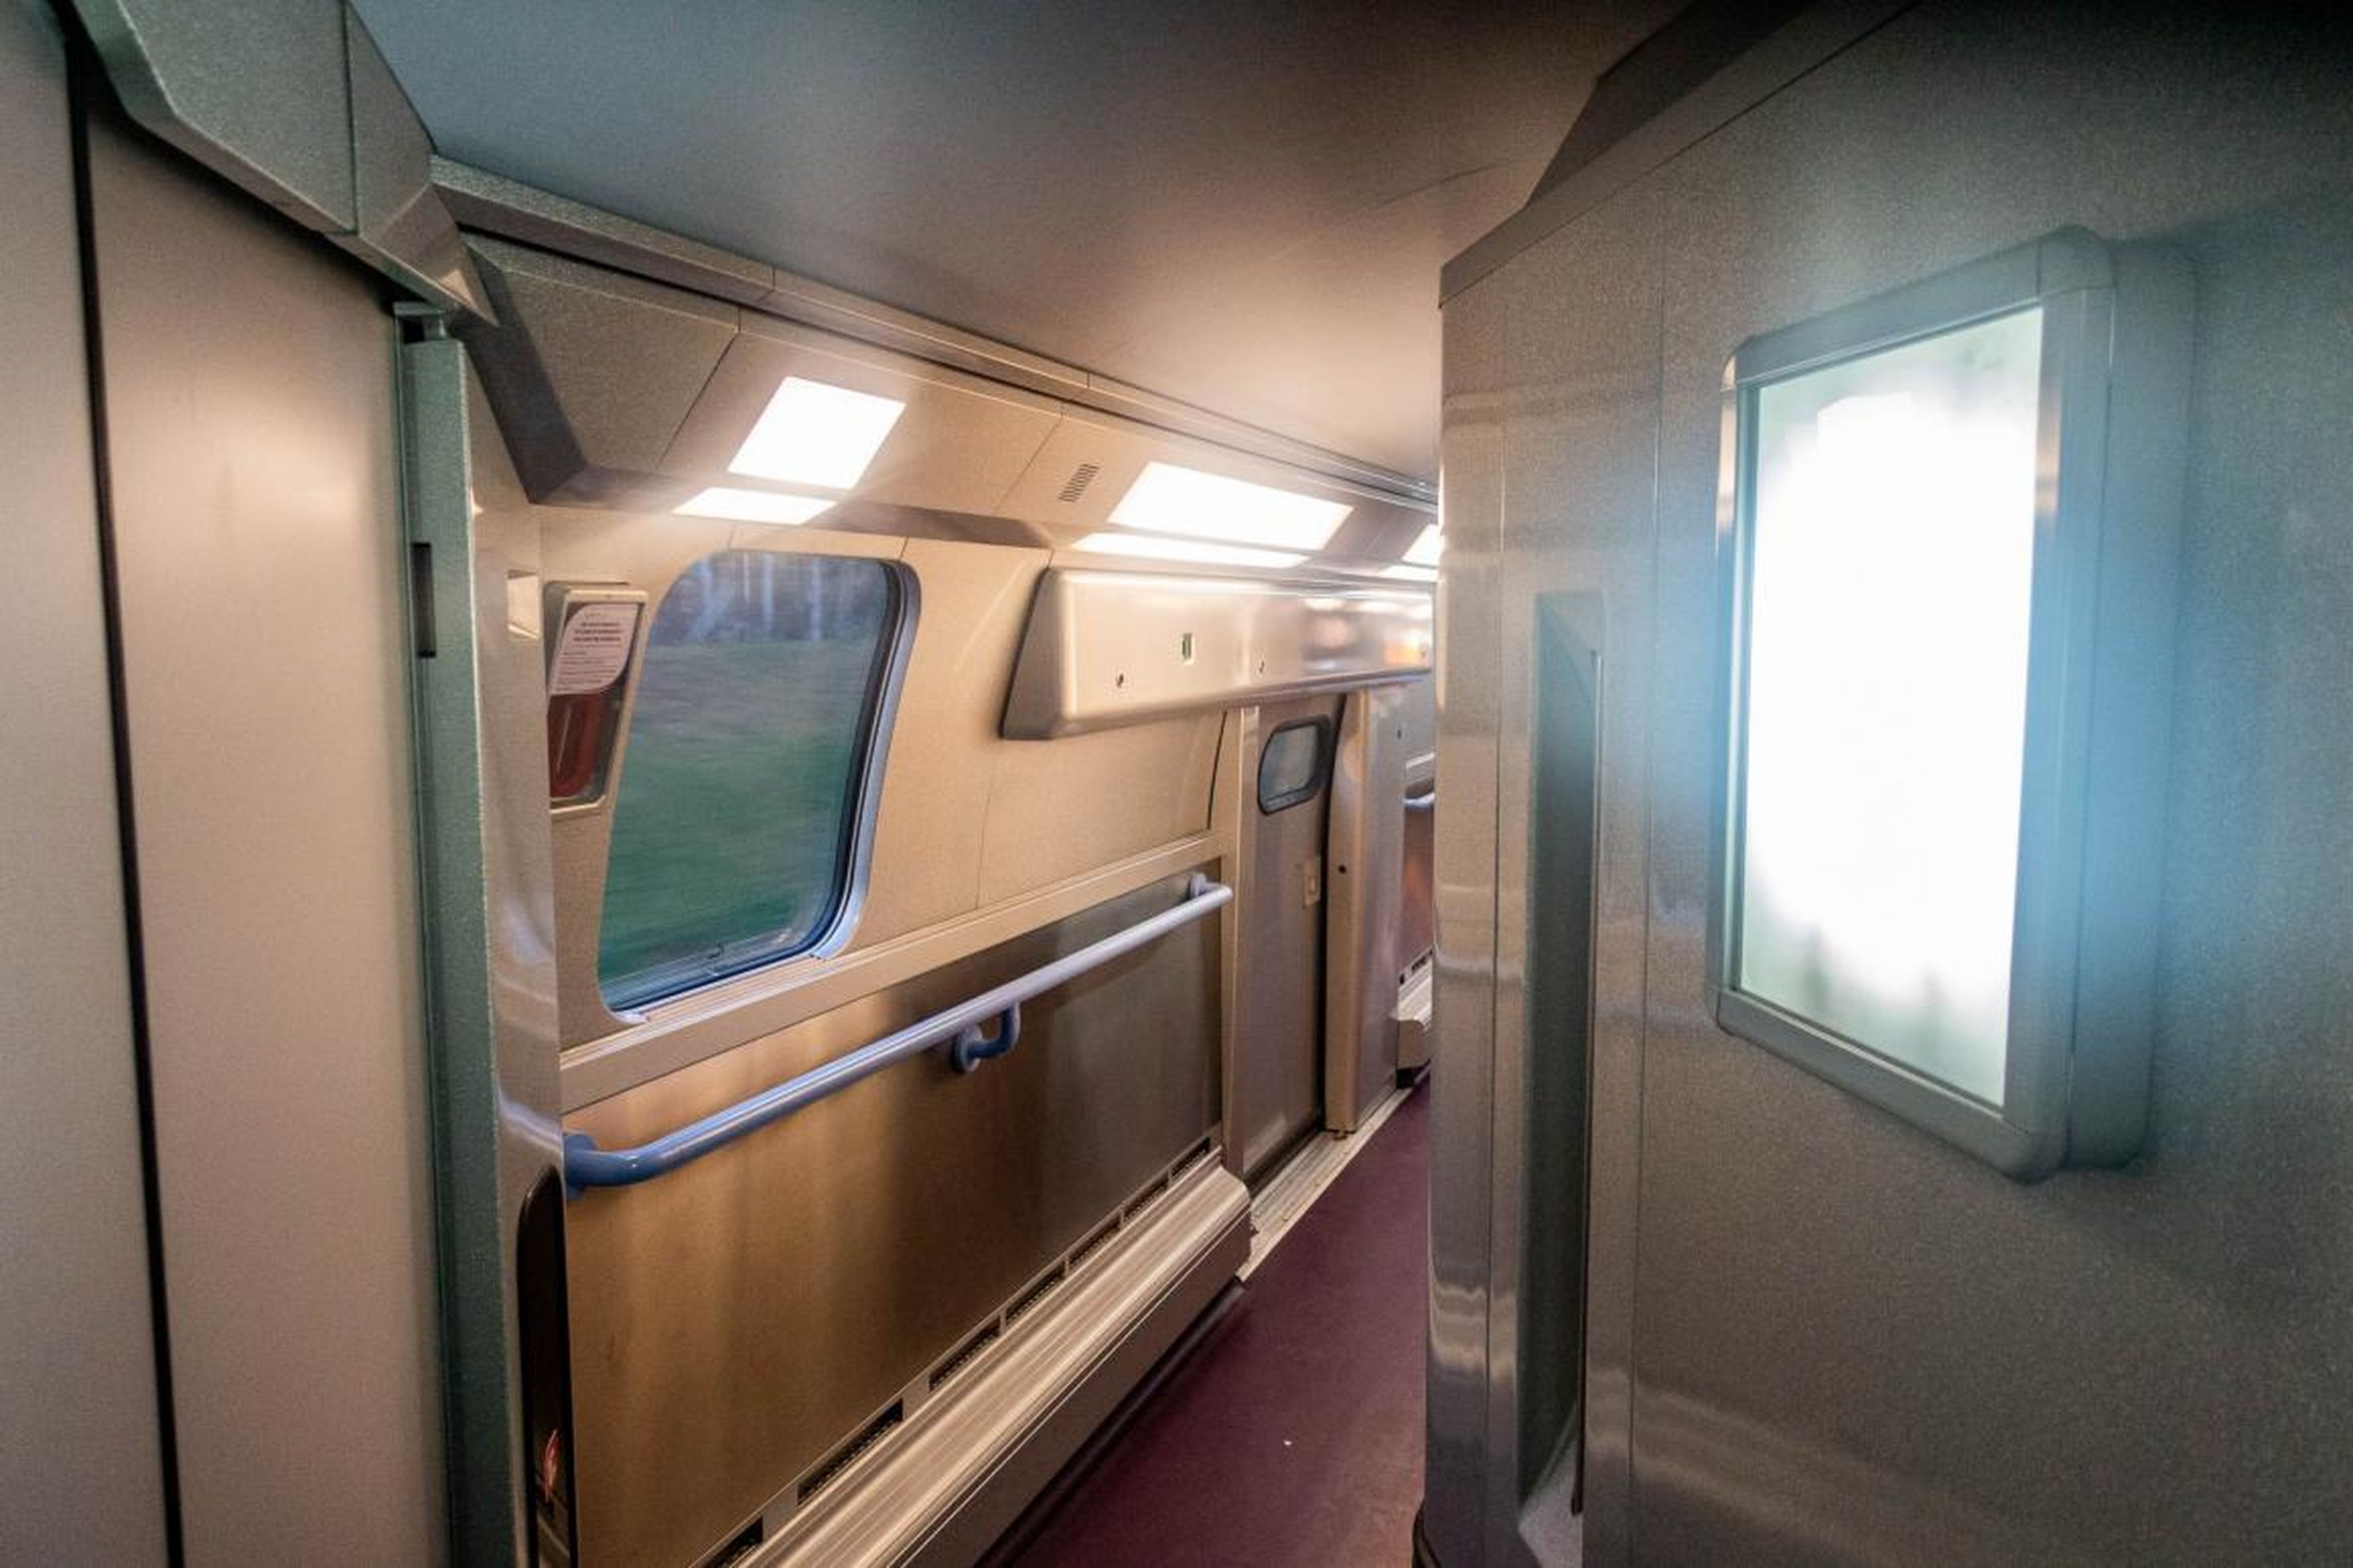 The second-class compartments were closer to the cafeteria car as well.